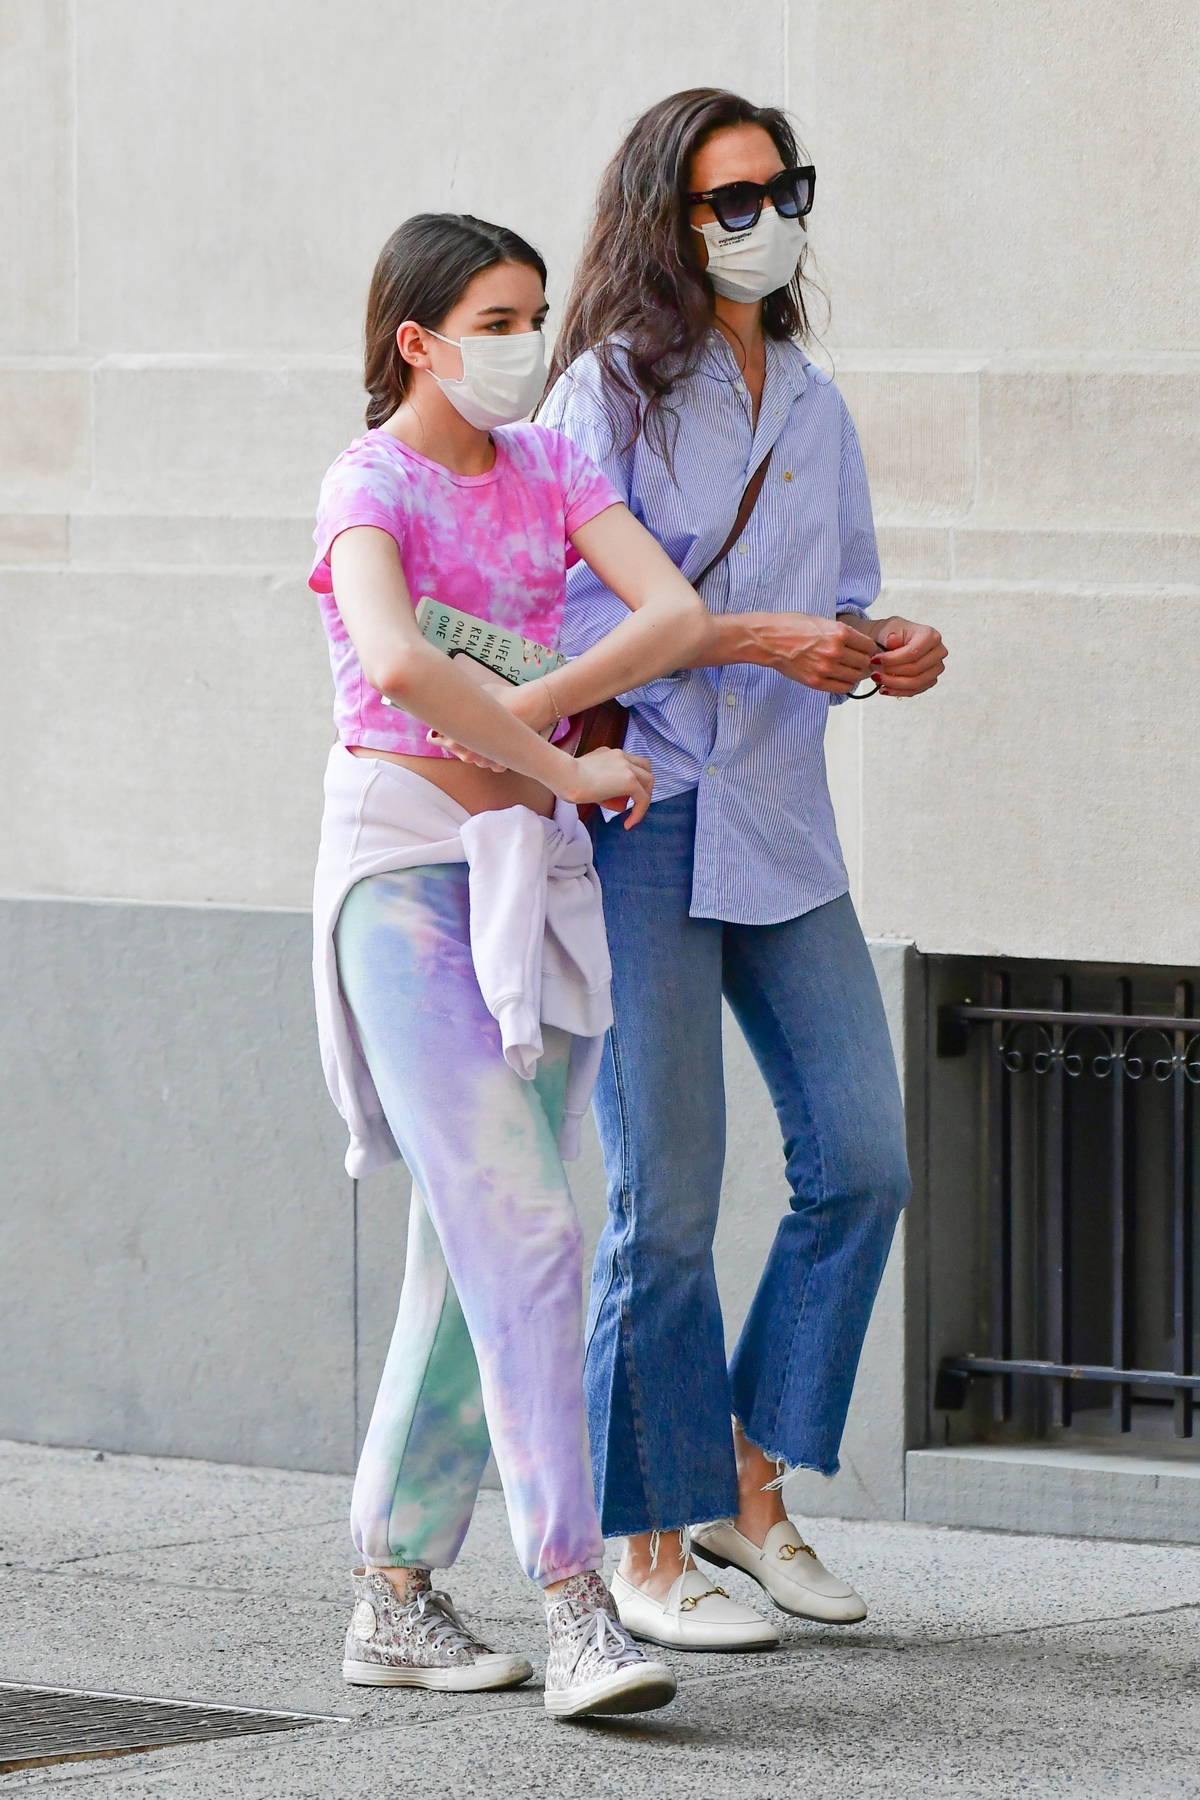 katie holmes and suri cruise step out for a stroll in new york city-180521_9